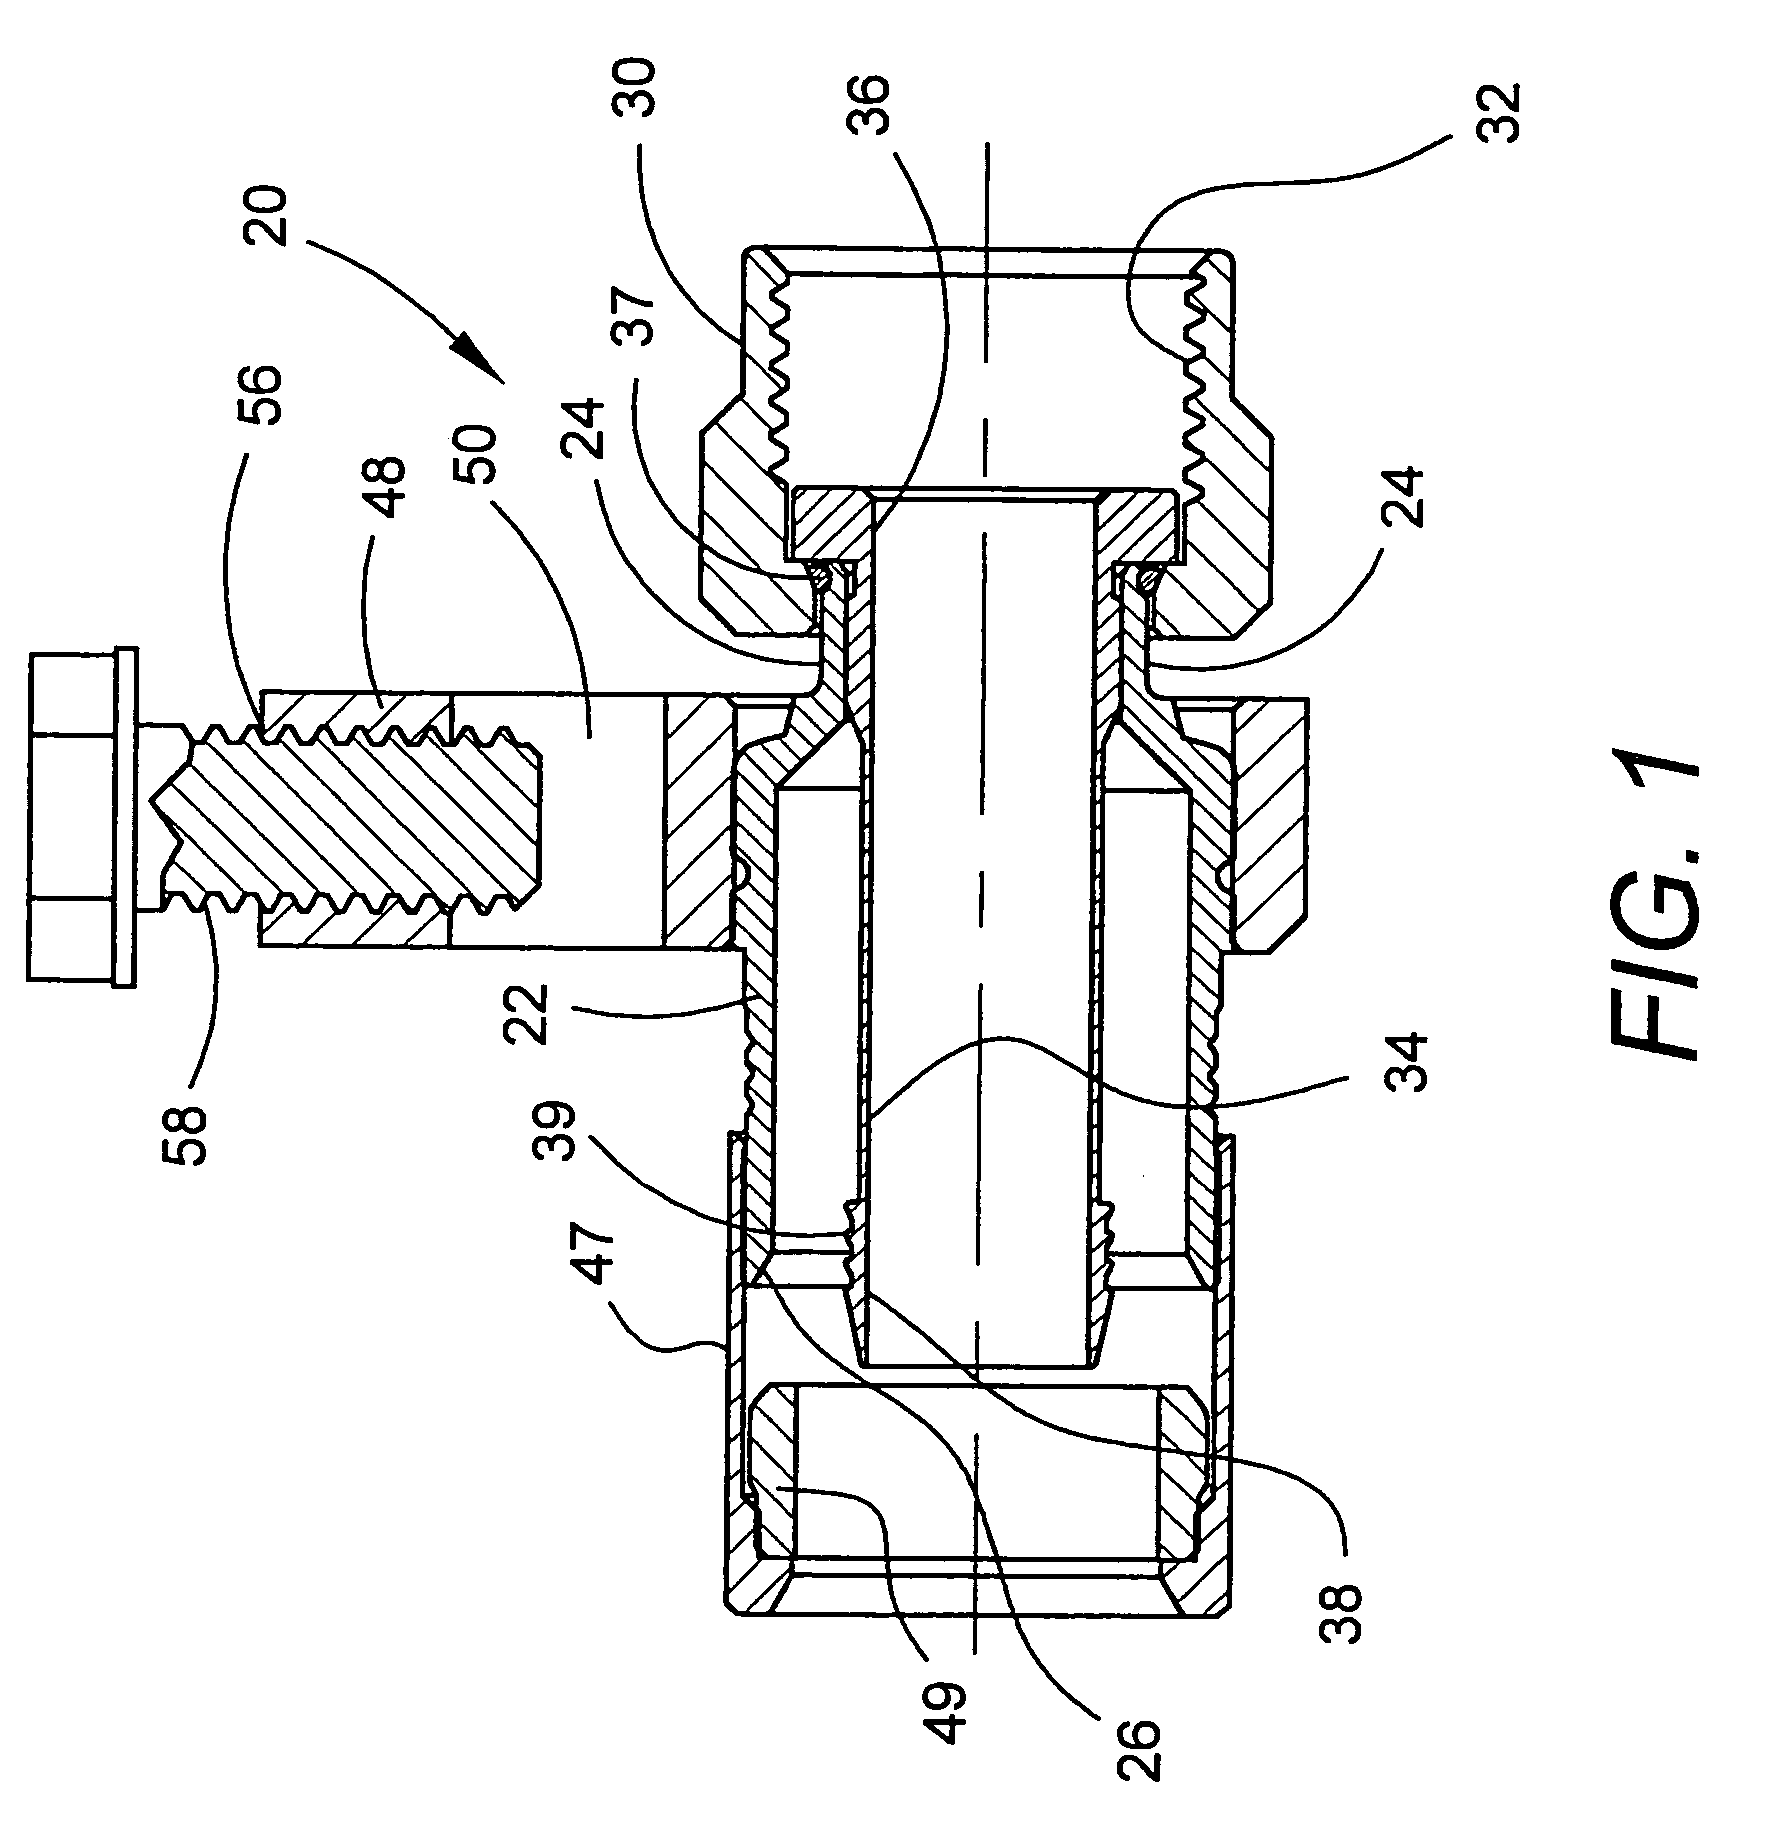 Coaxial cable connector with electrical ground